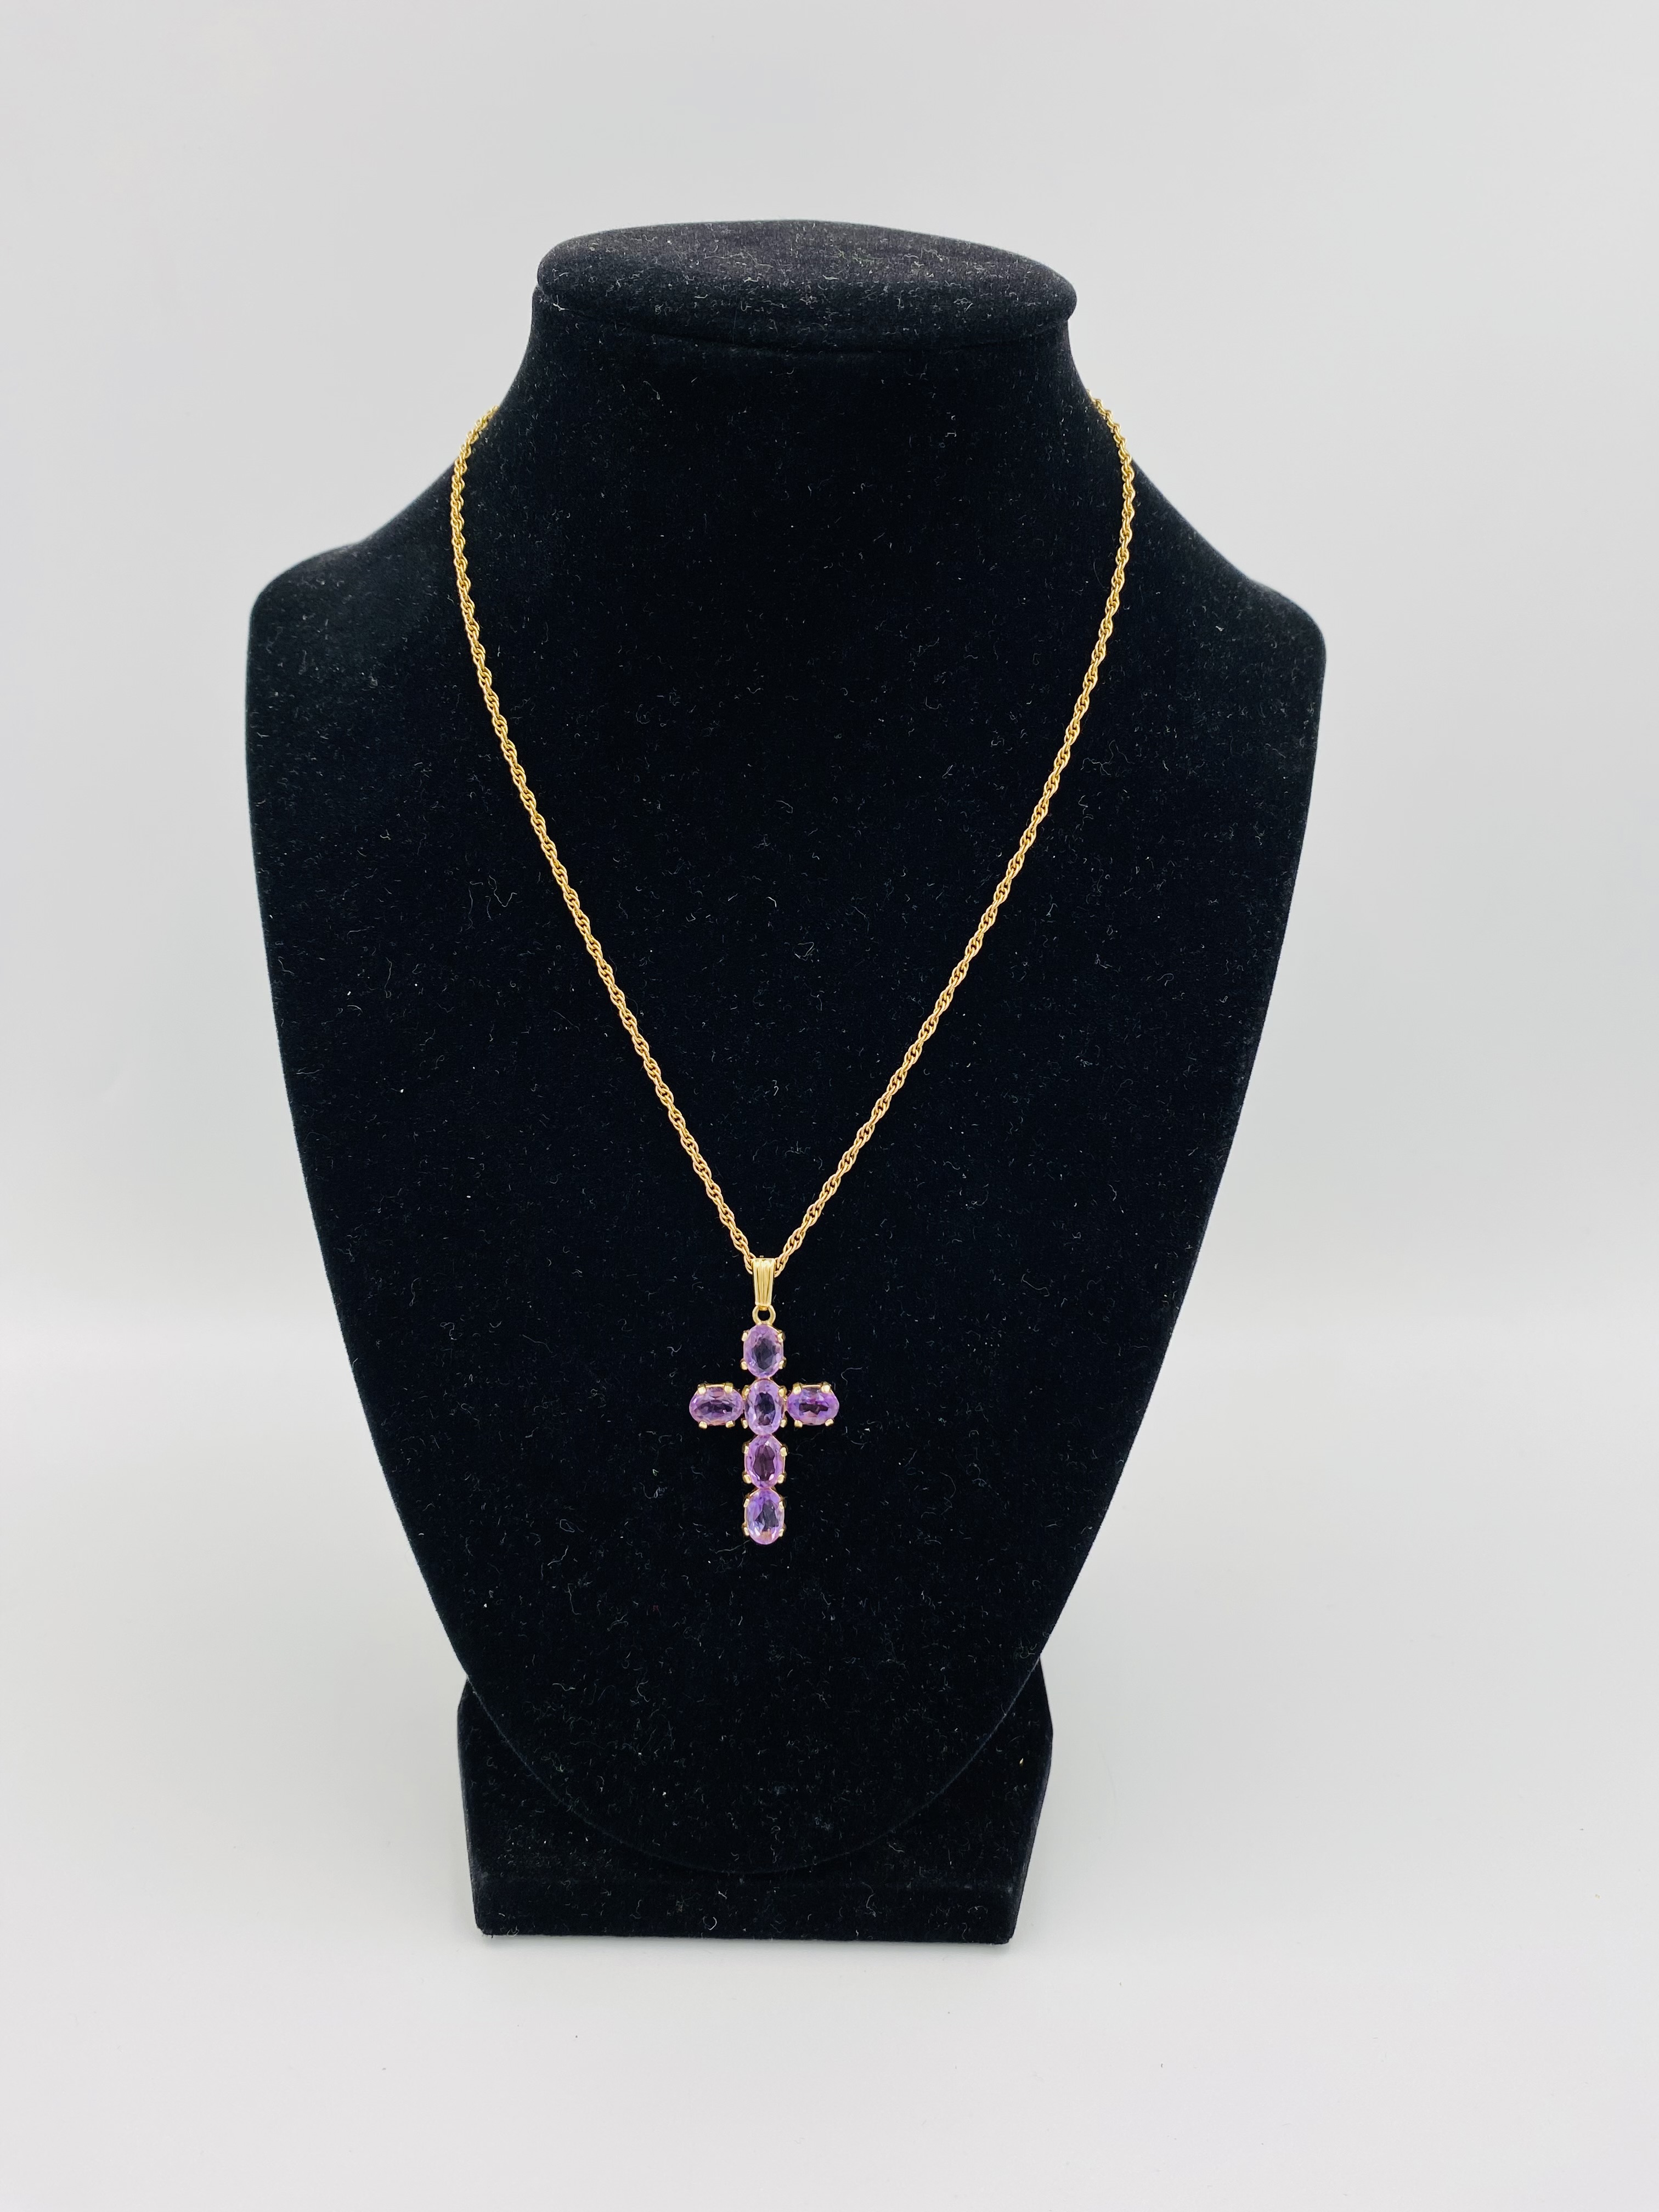 9ct gold cross set with amethysts, on a 9ct gold rope chain - Image 5 of 5